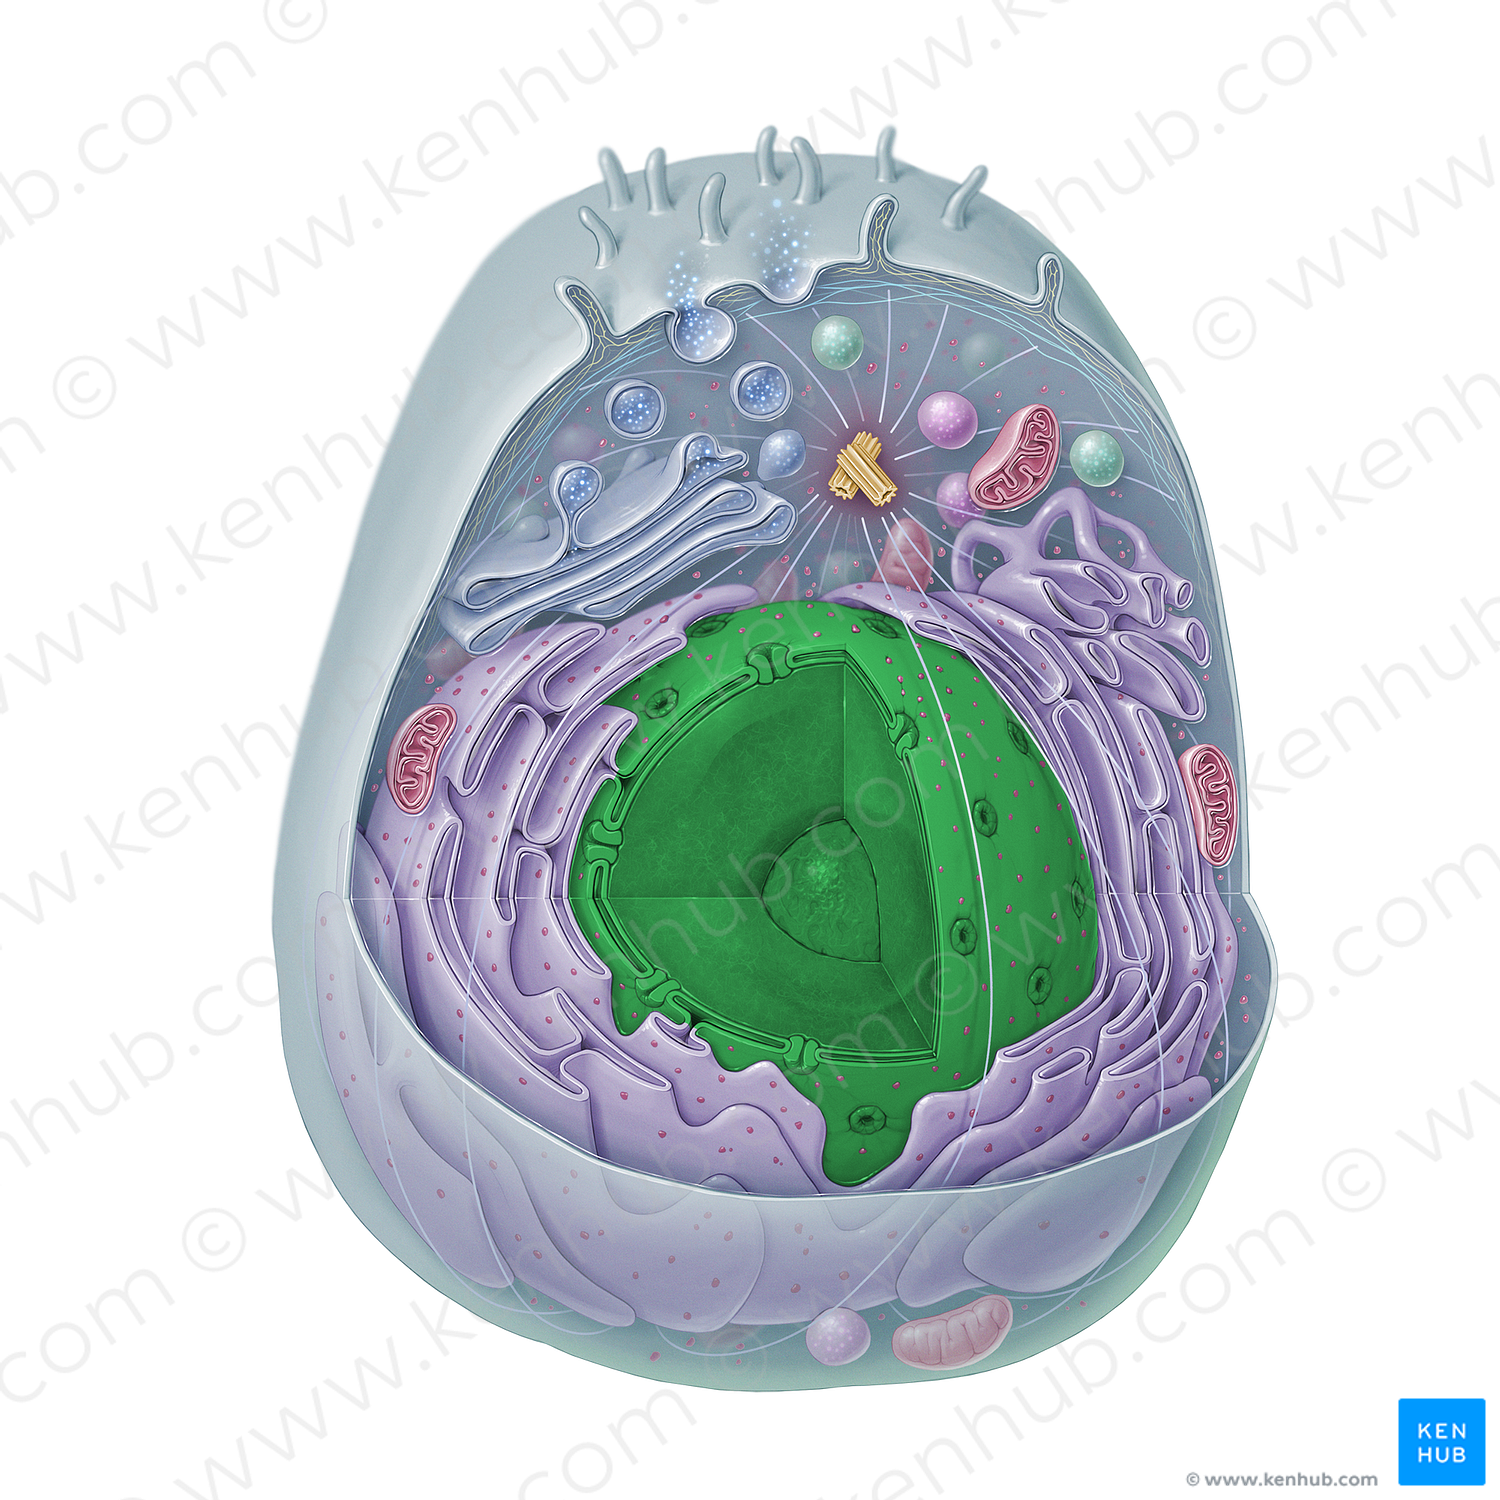 Cell nucleus (#15334)